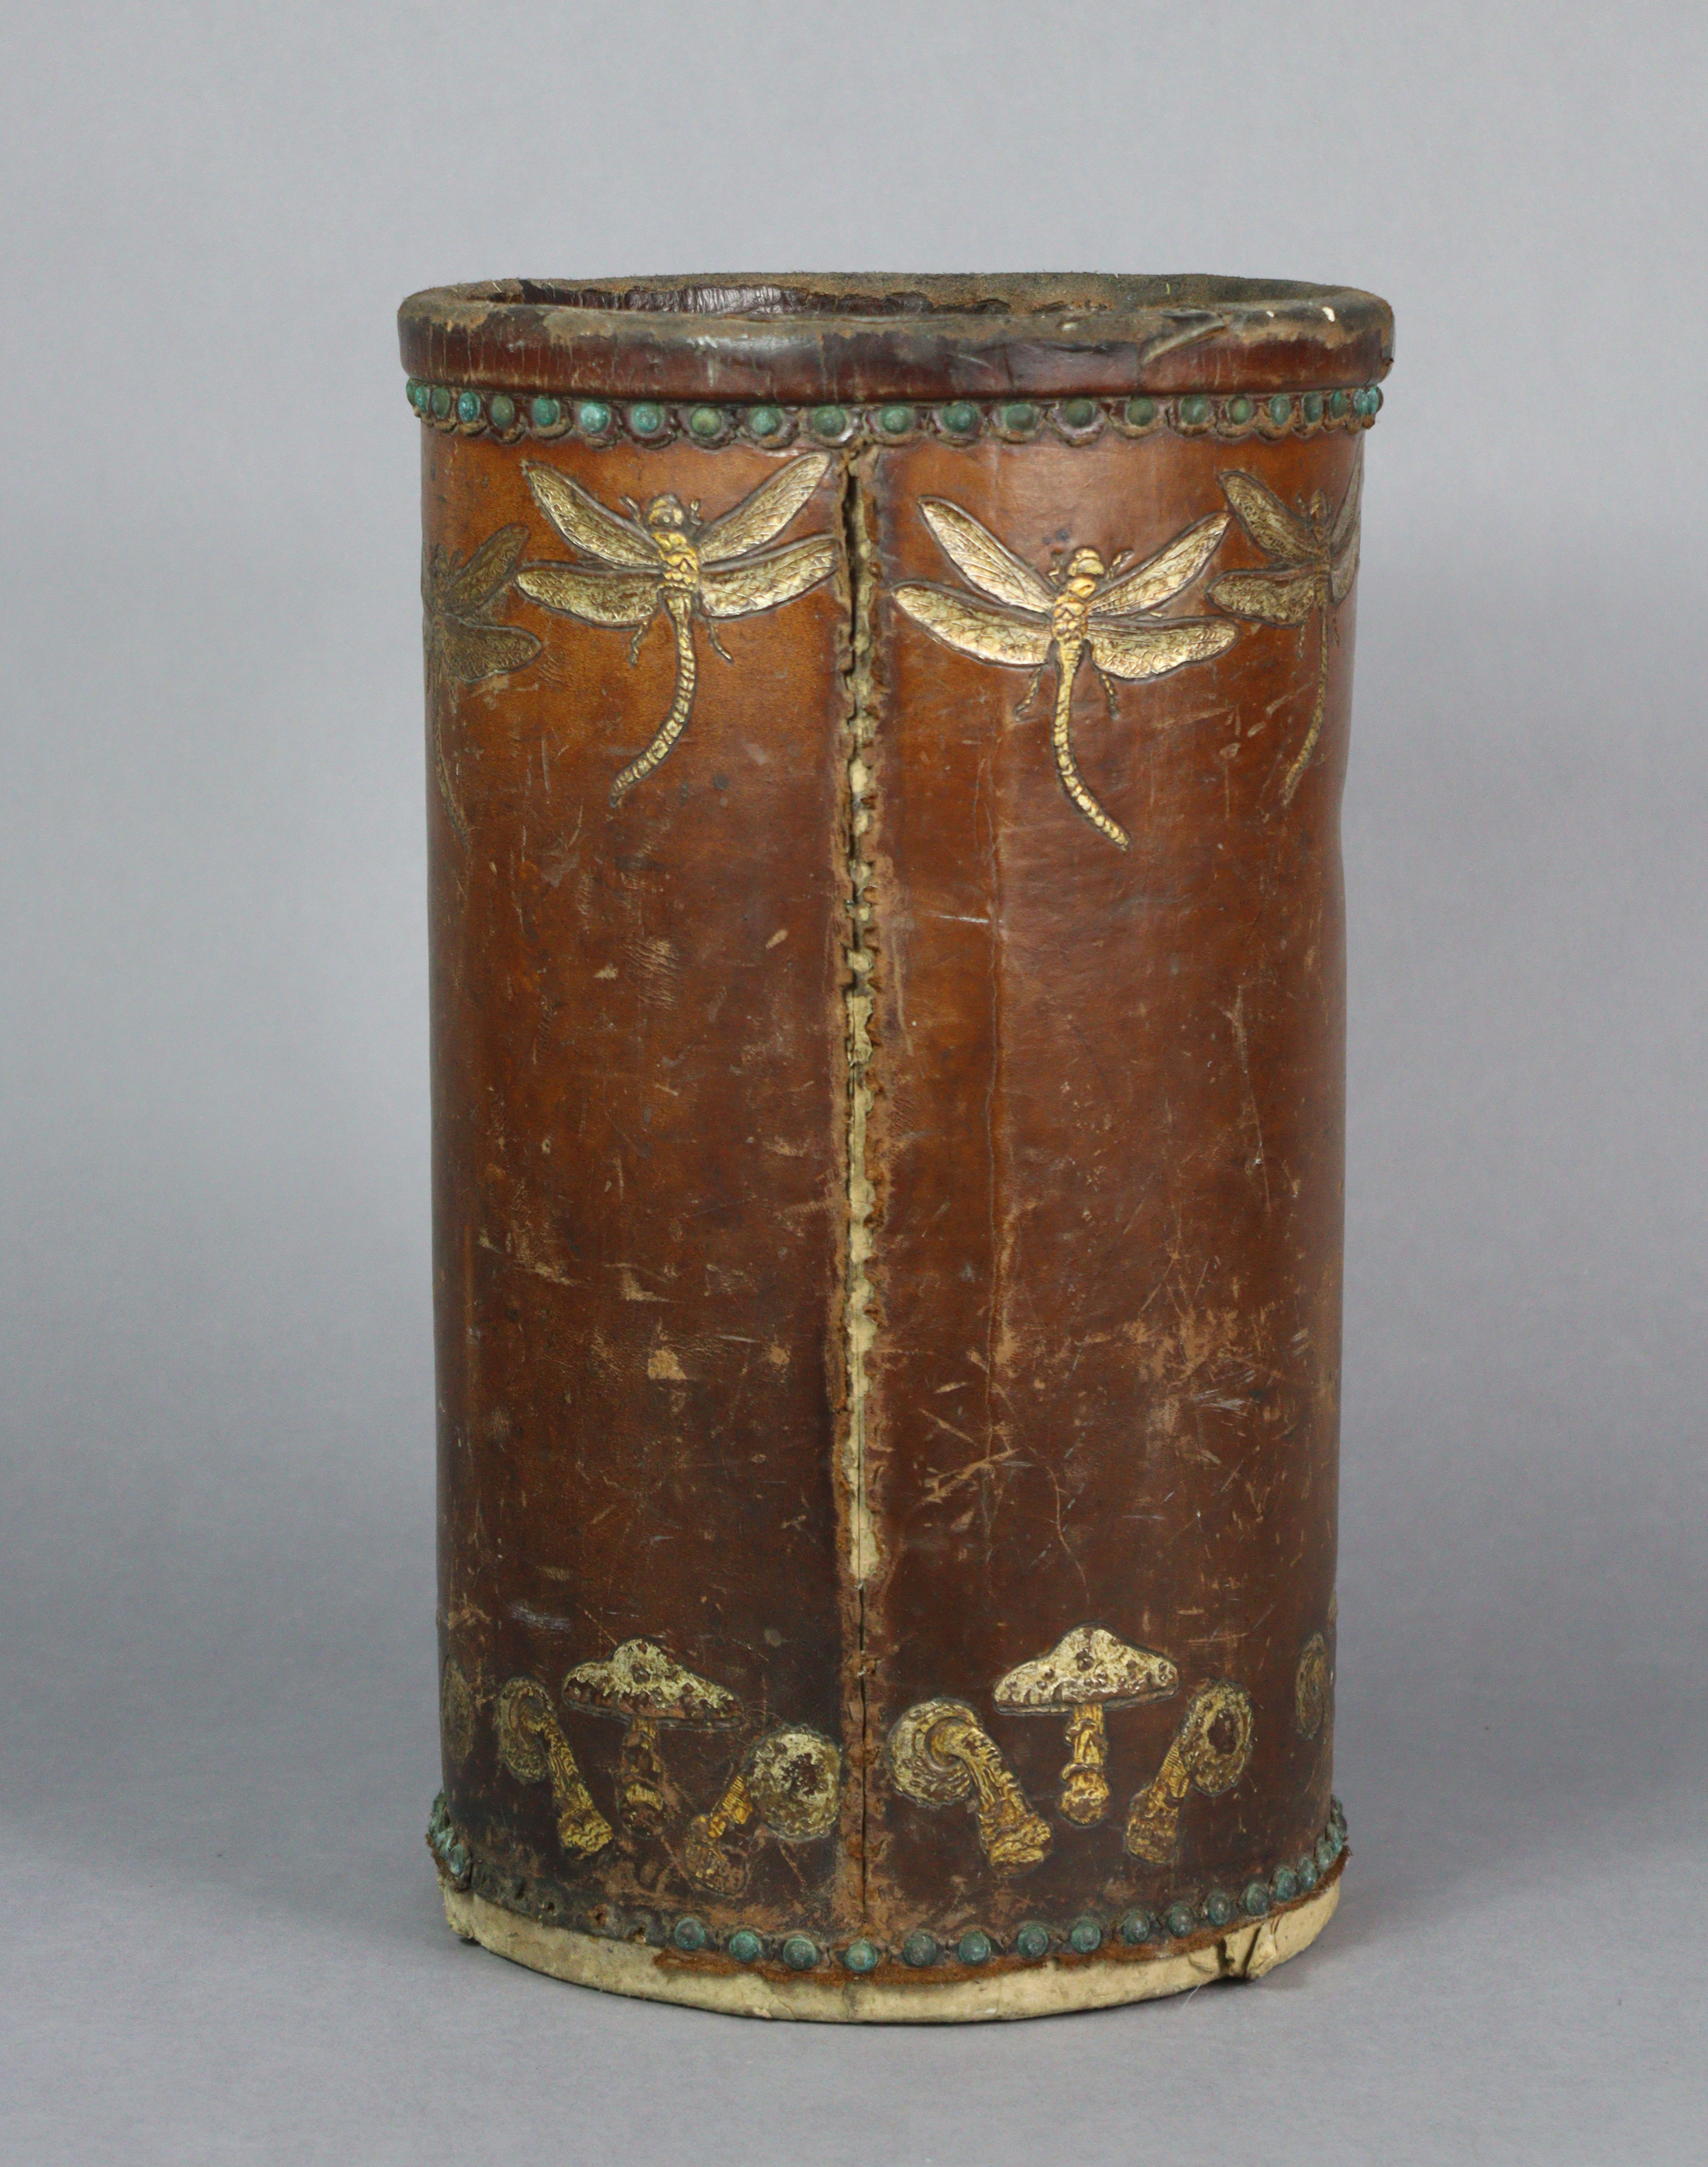 A GEORGE HULBE of Hamburg LEATHER-COVERED STICK-STAND or paper bin, with gilt tooled decoration of - Image 2 of 6